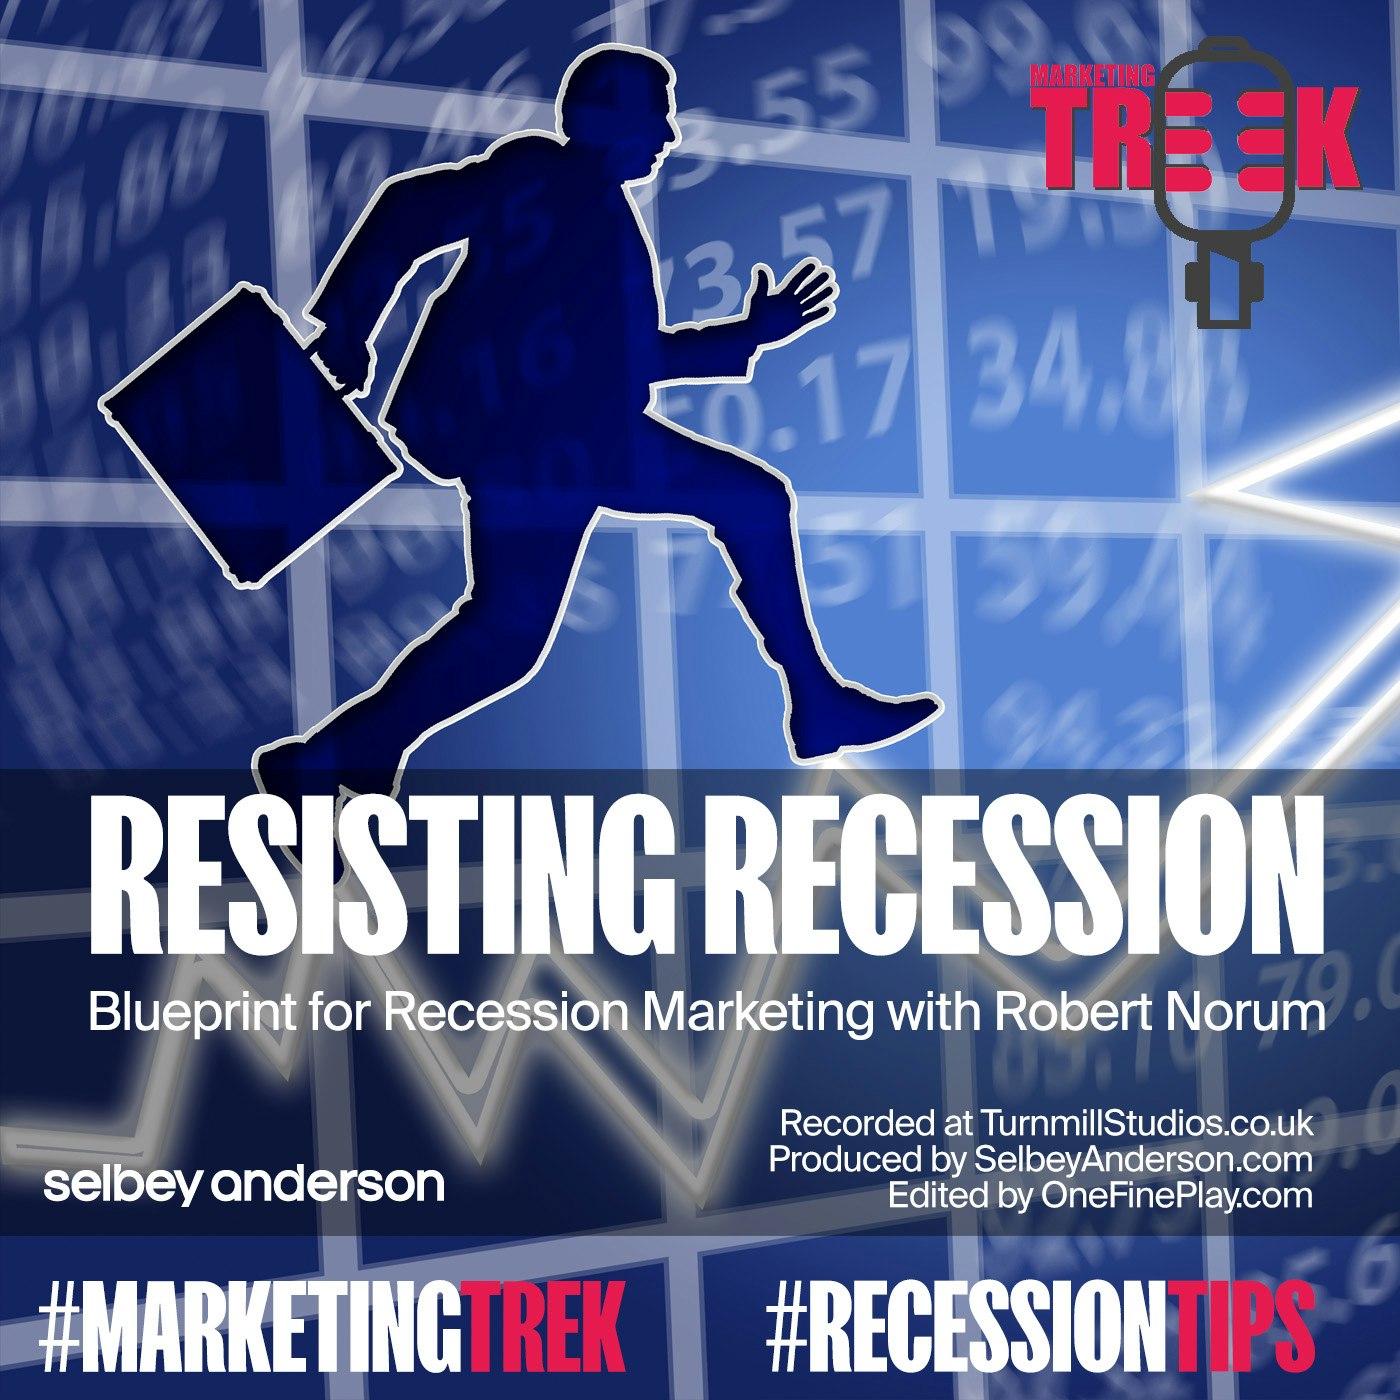 Episode 22: Blueprint for Recession Marketing with Robert Norum